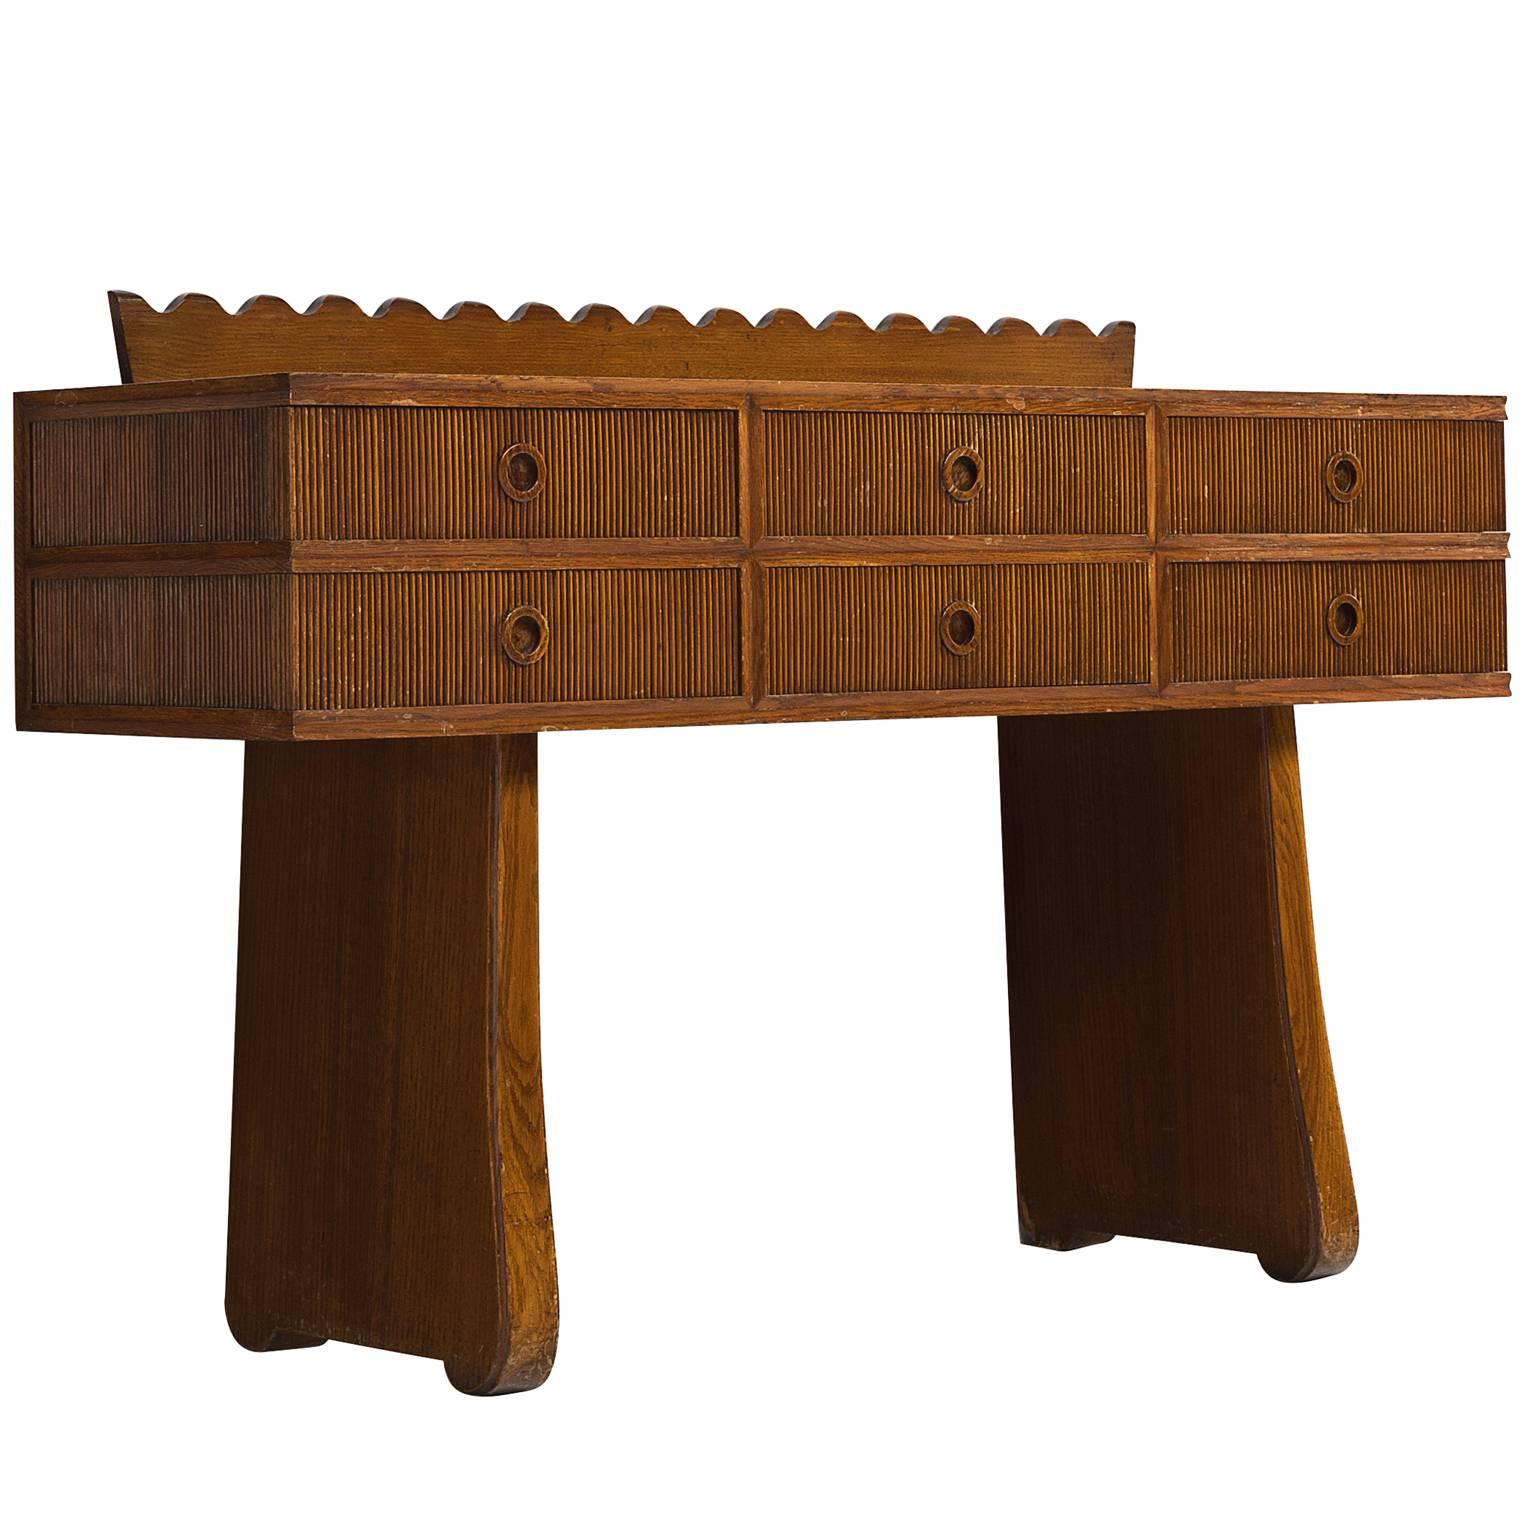 Early Italian High Console Table in Walnut, 1940s